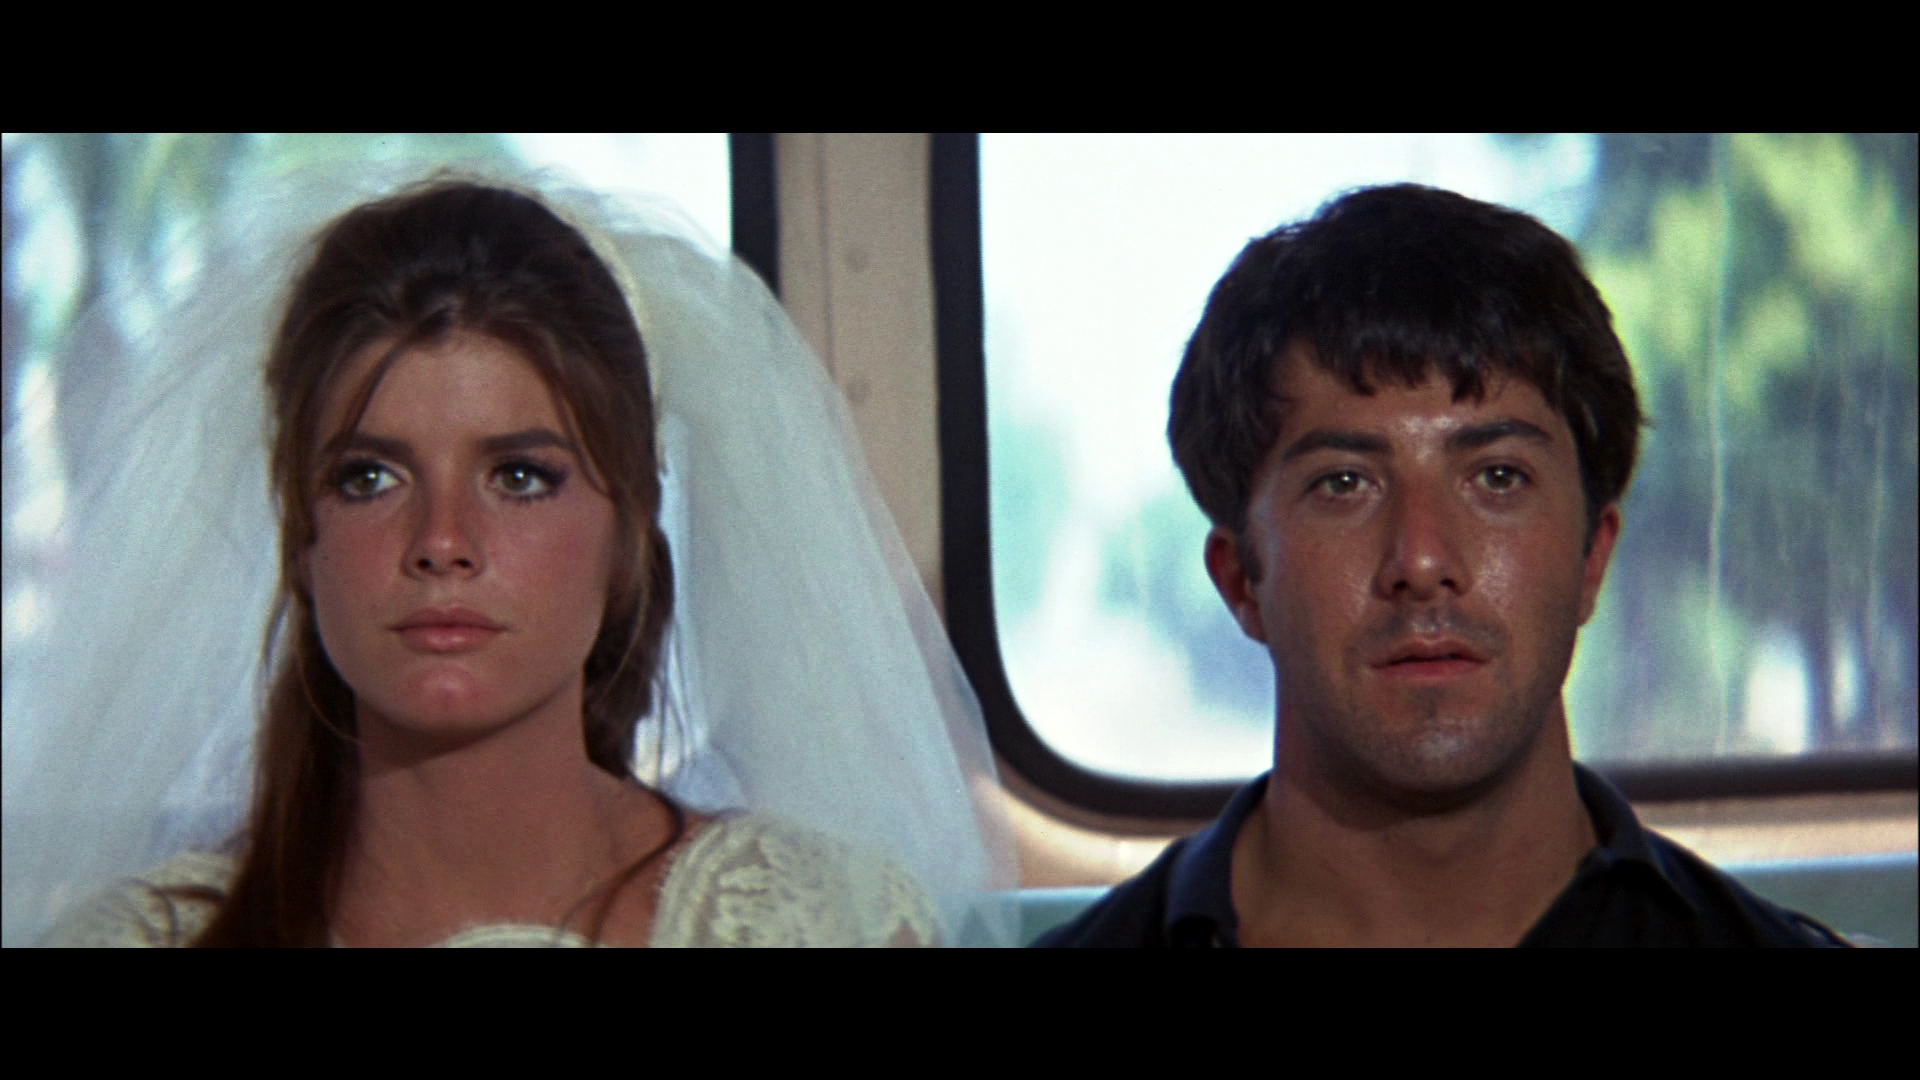 How 500 days' reference to The Graduate sums up modern day relationships